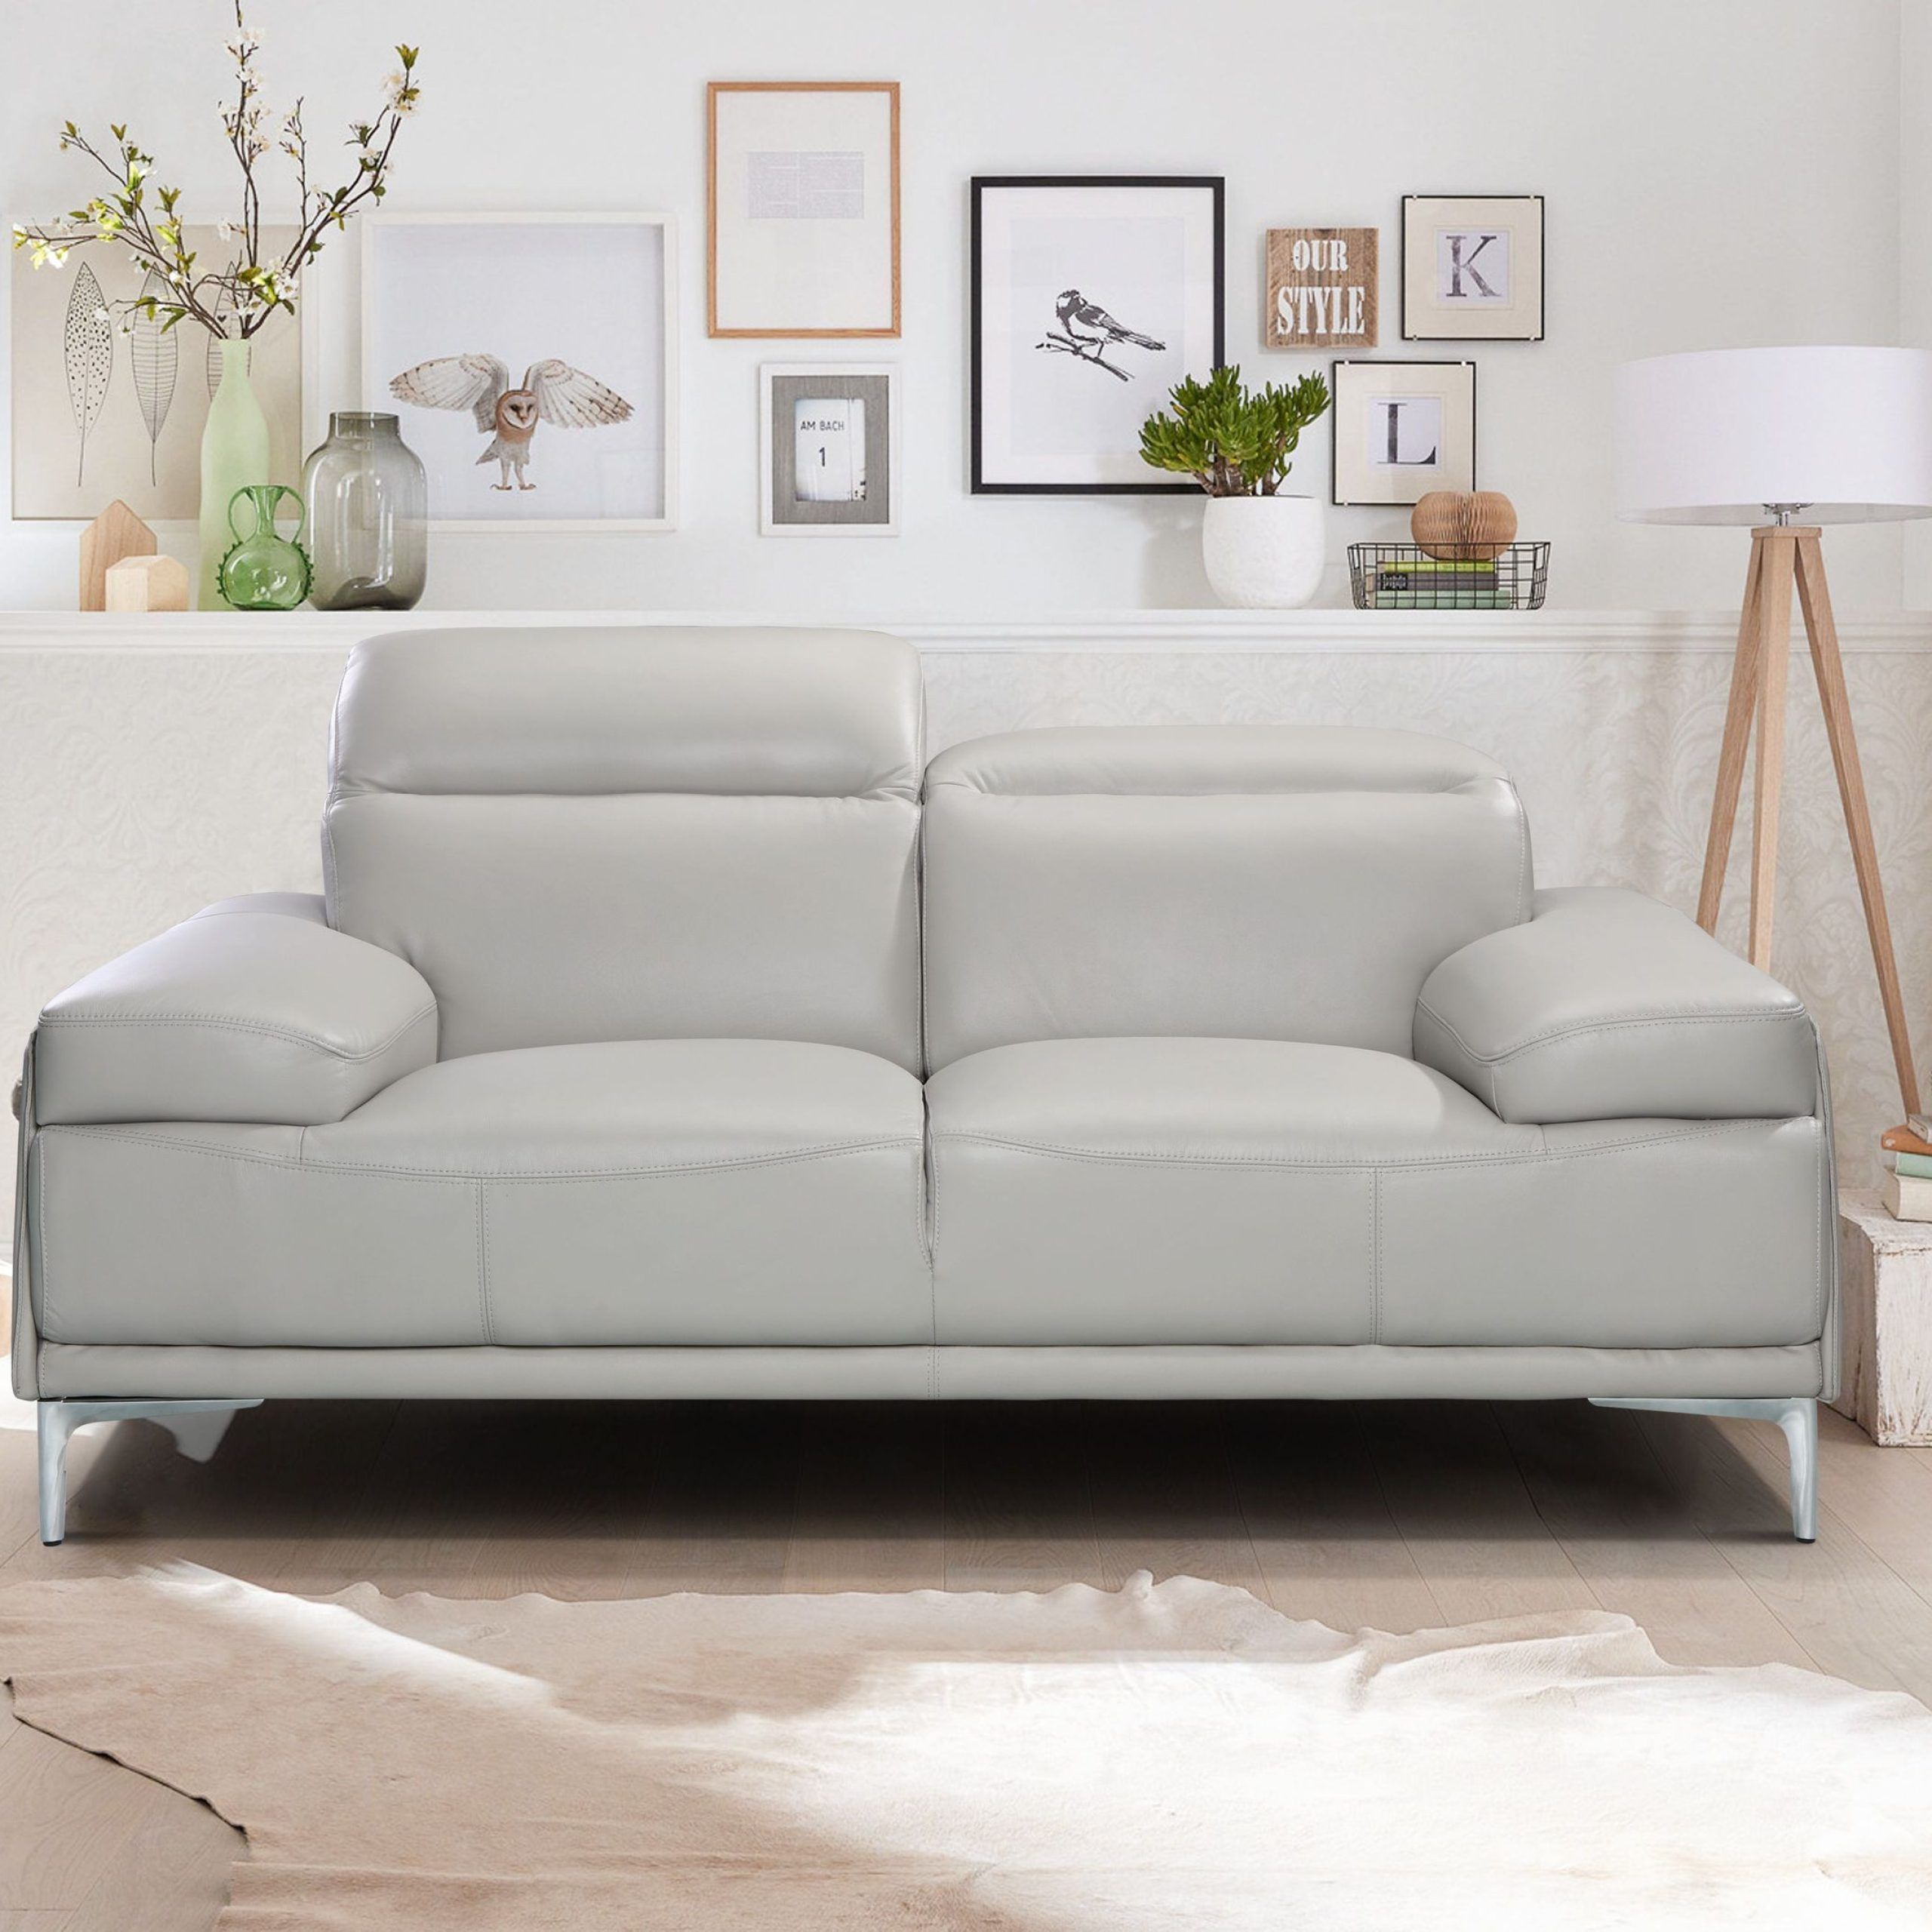 Nicolo Light Grey Loveseat From Jnm | Coleman Furniture Throughout Modern Light Grey Loveseat Sofas (View 15 of 15)